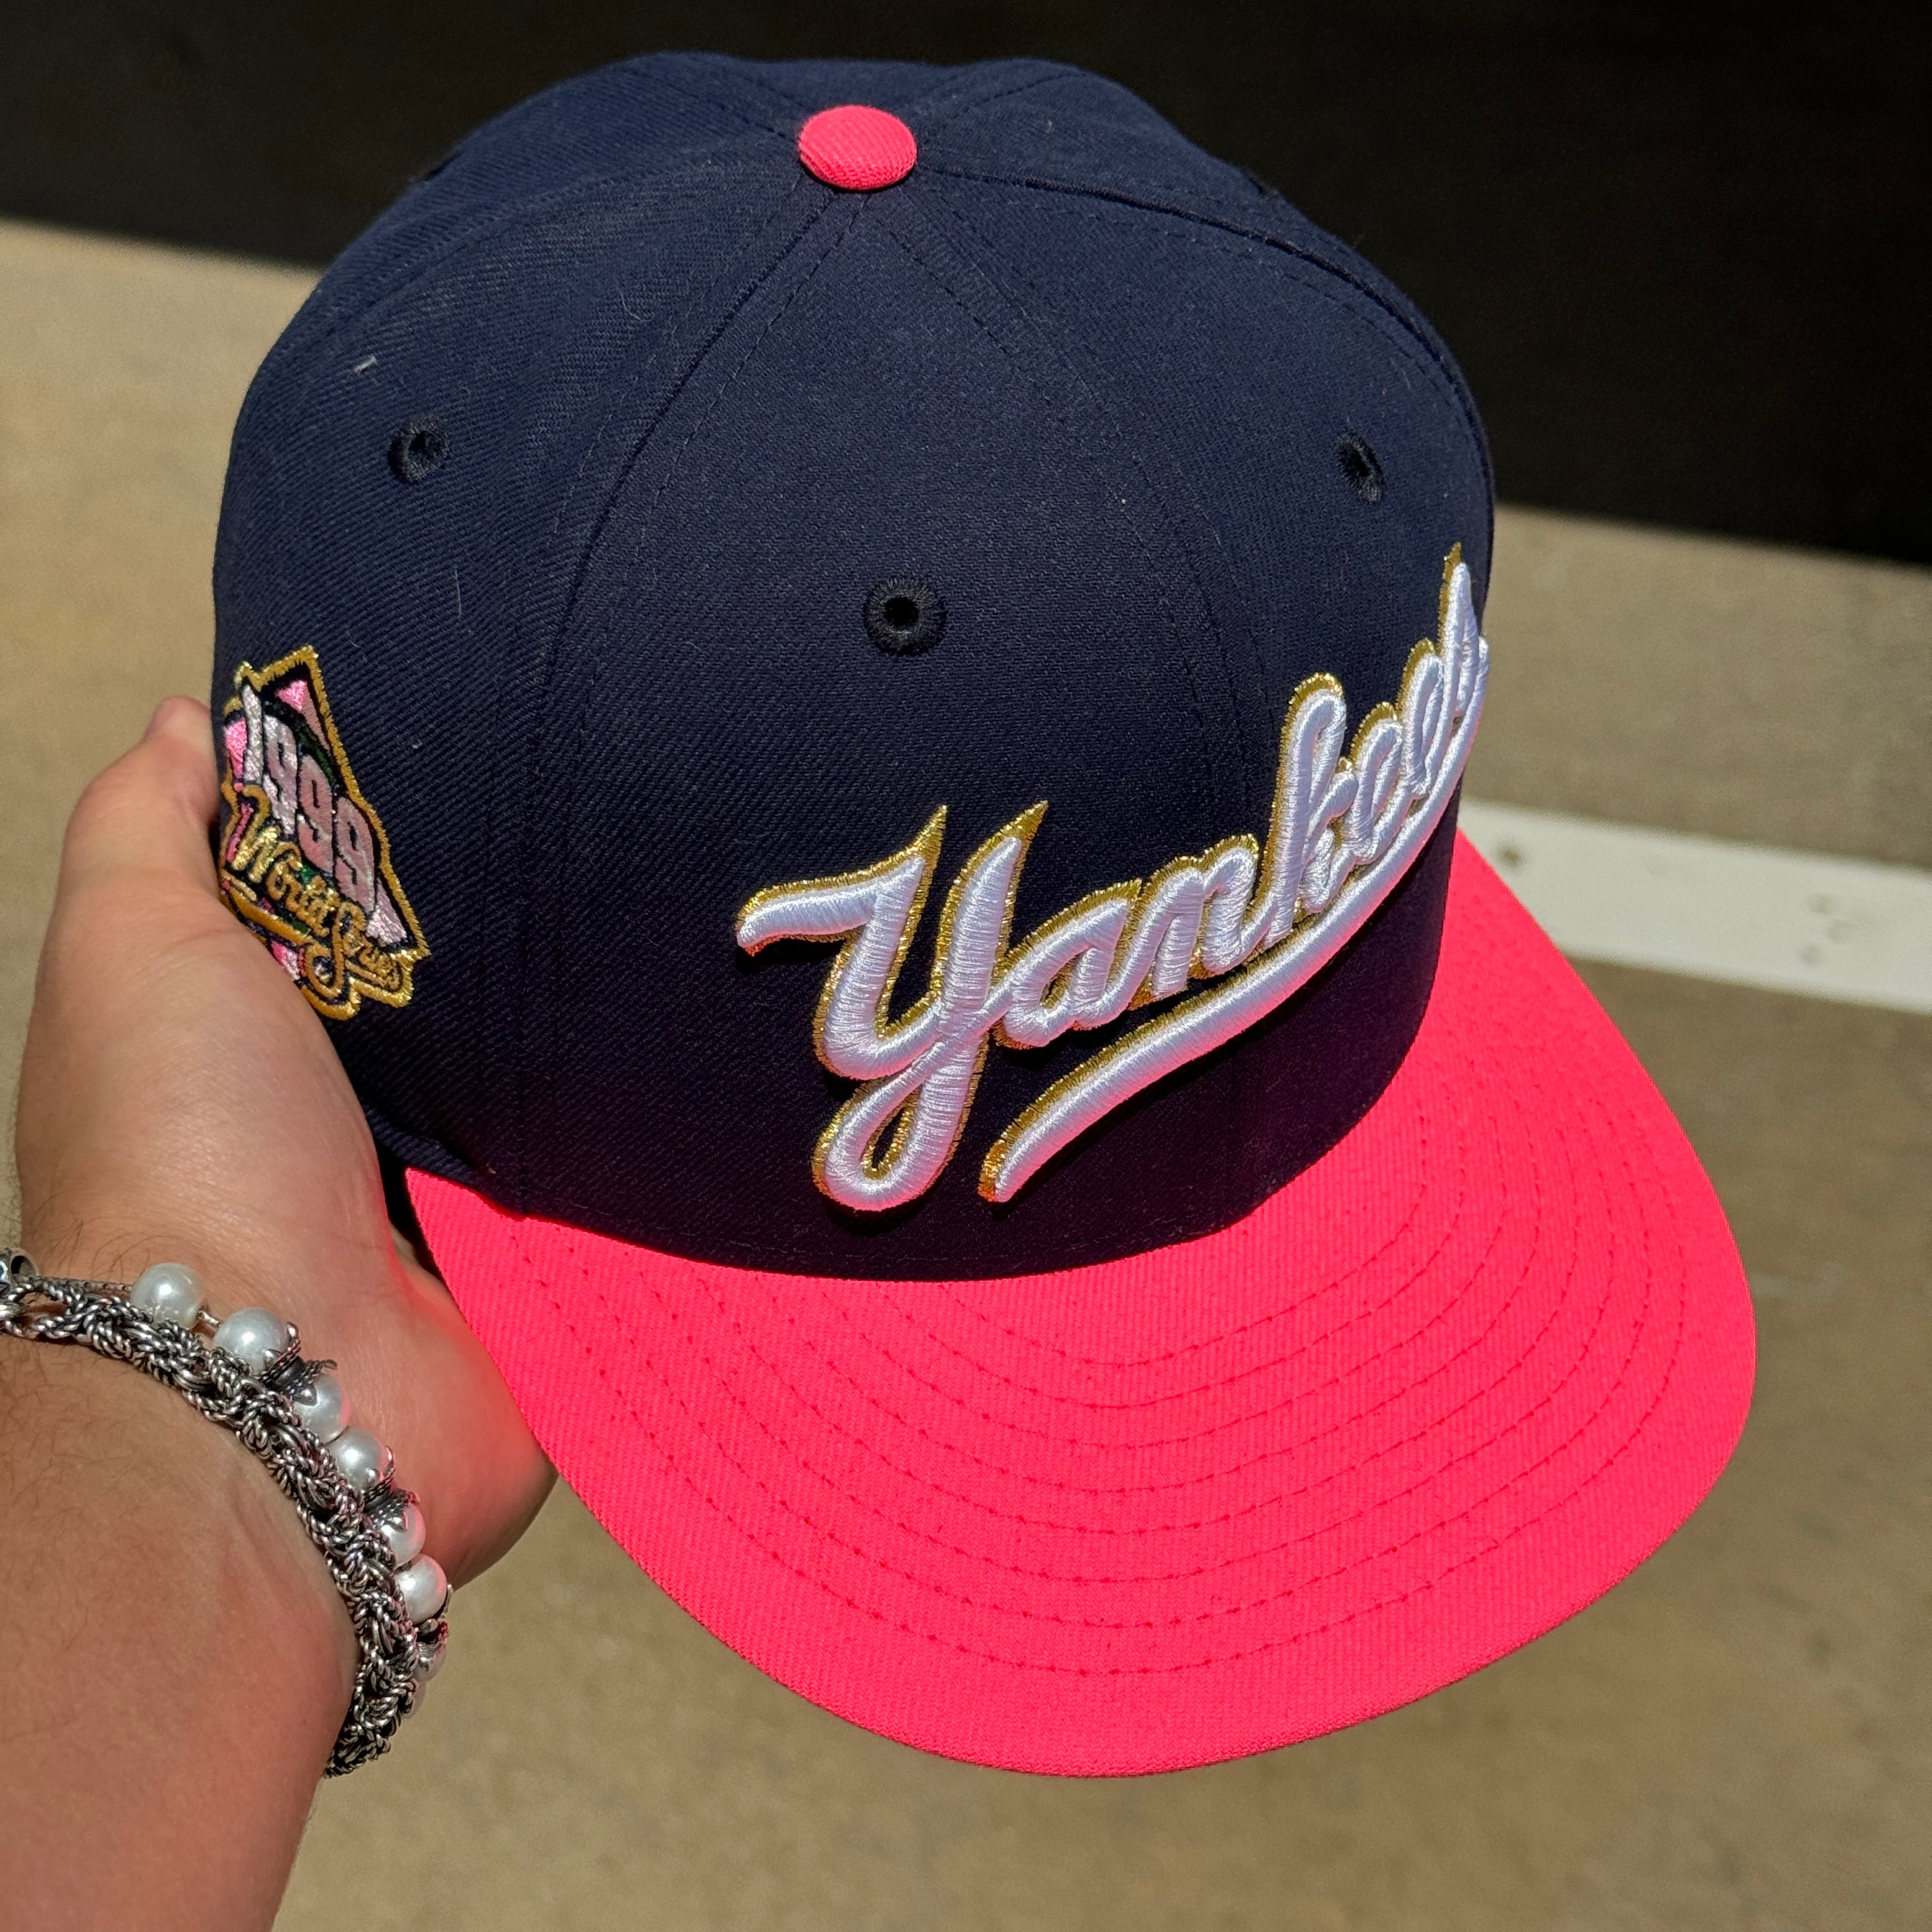 USED 1/8 Navy New York Yankees 1999 World Series Pink 59FIFTY New Era Fitted Hat